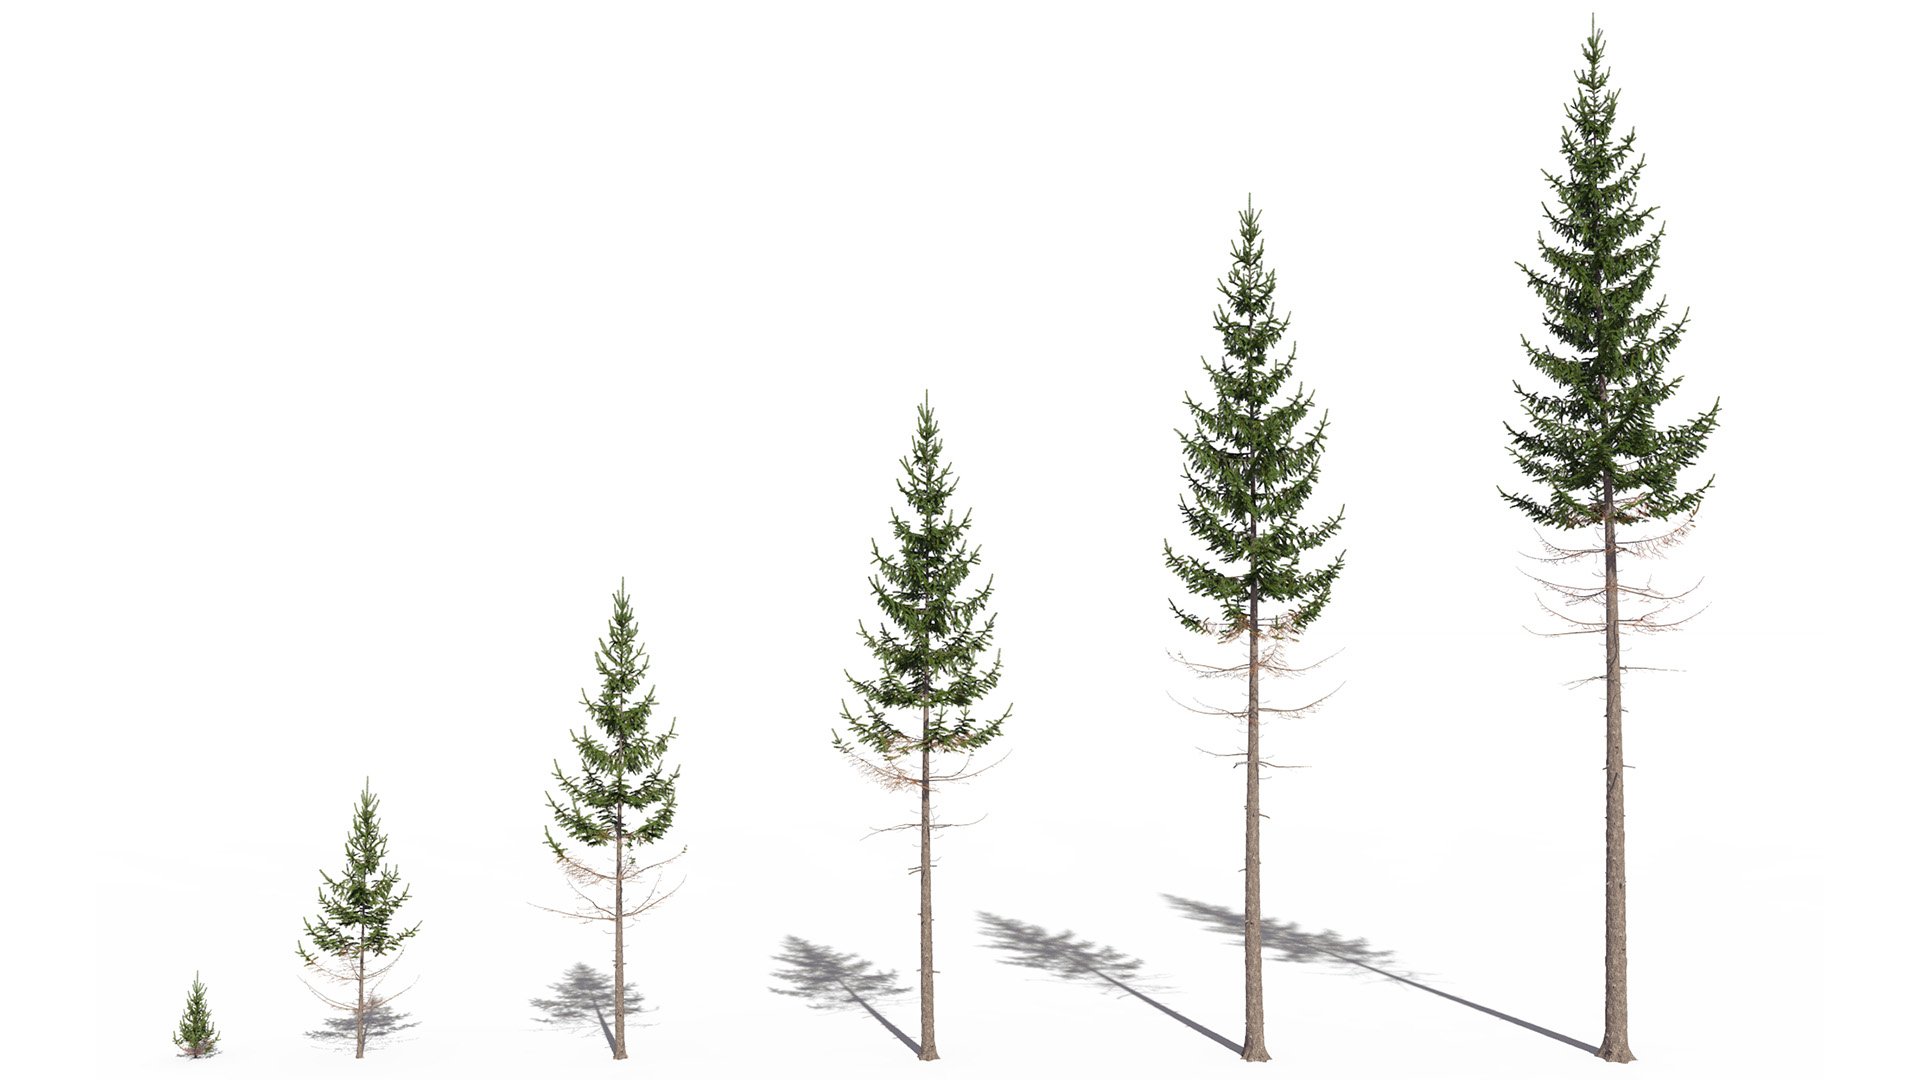 3D model of the Norway spruce Picea abies